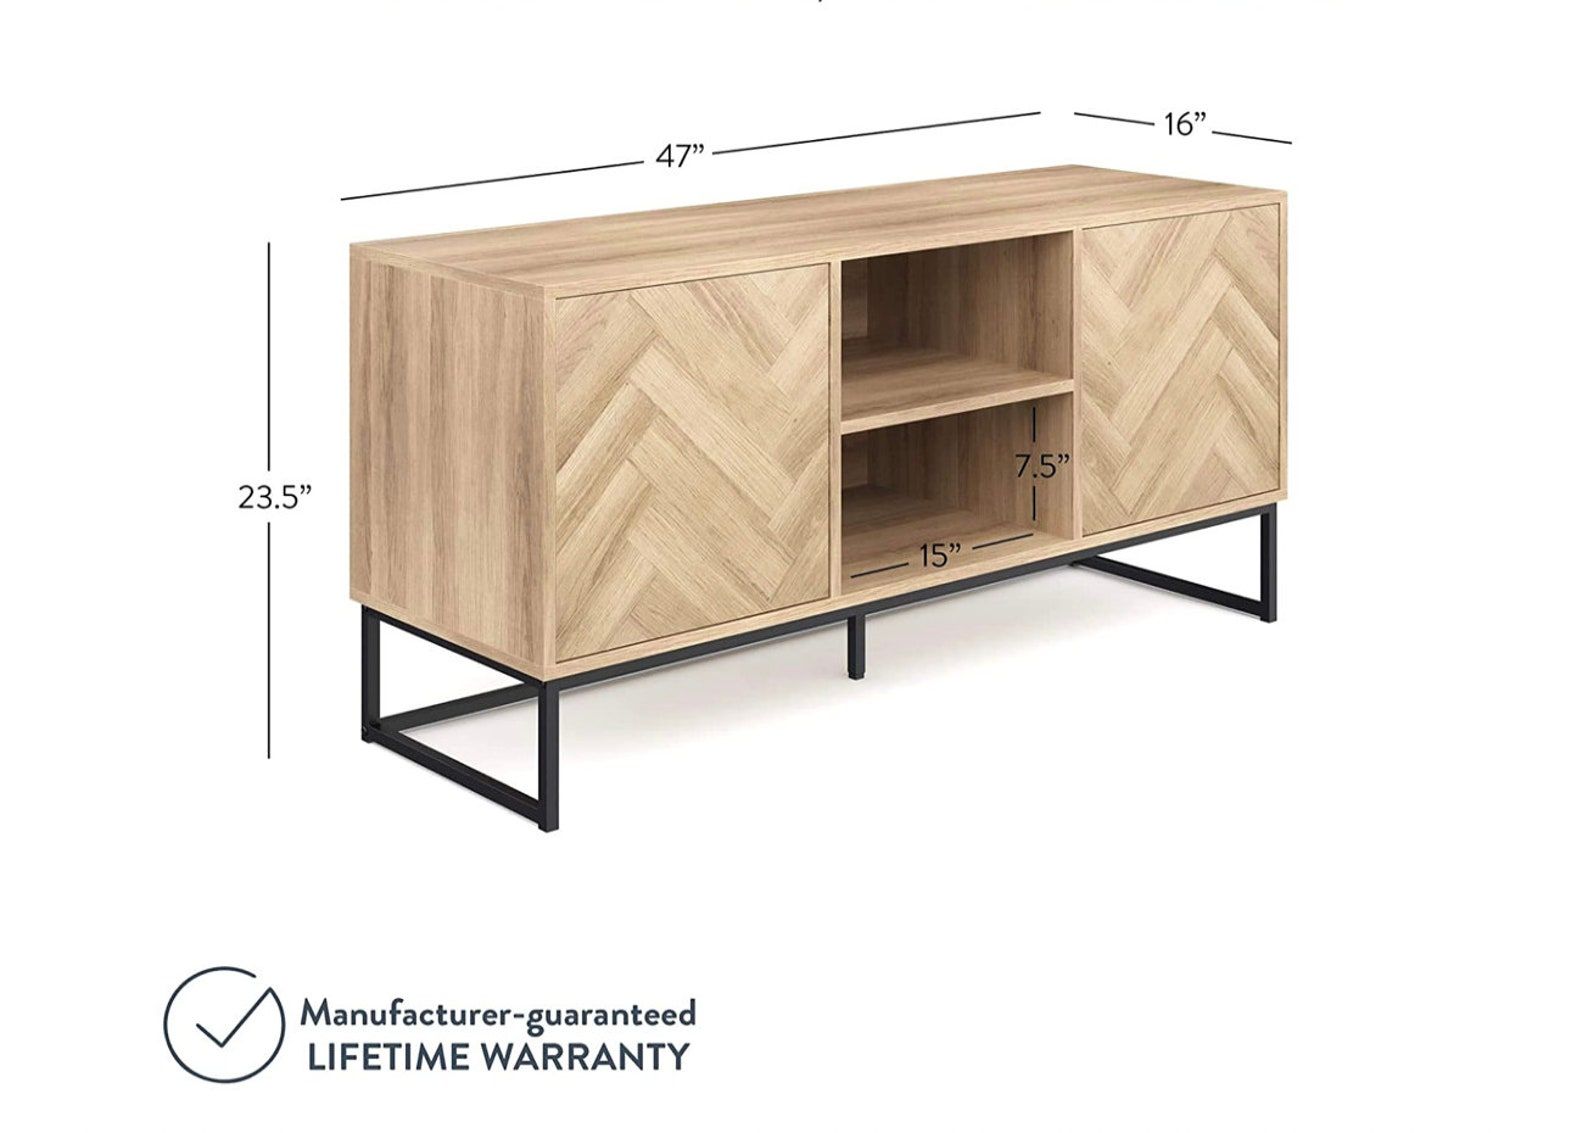 Console Cabinet Or Tv Stand With Doors For Hidden Storage For Media Console Cabinet Tv Stands With Hidden Storage Herringbone Pattern Wood Metal (View 12 of 15)